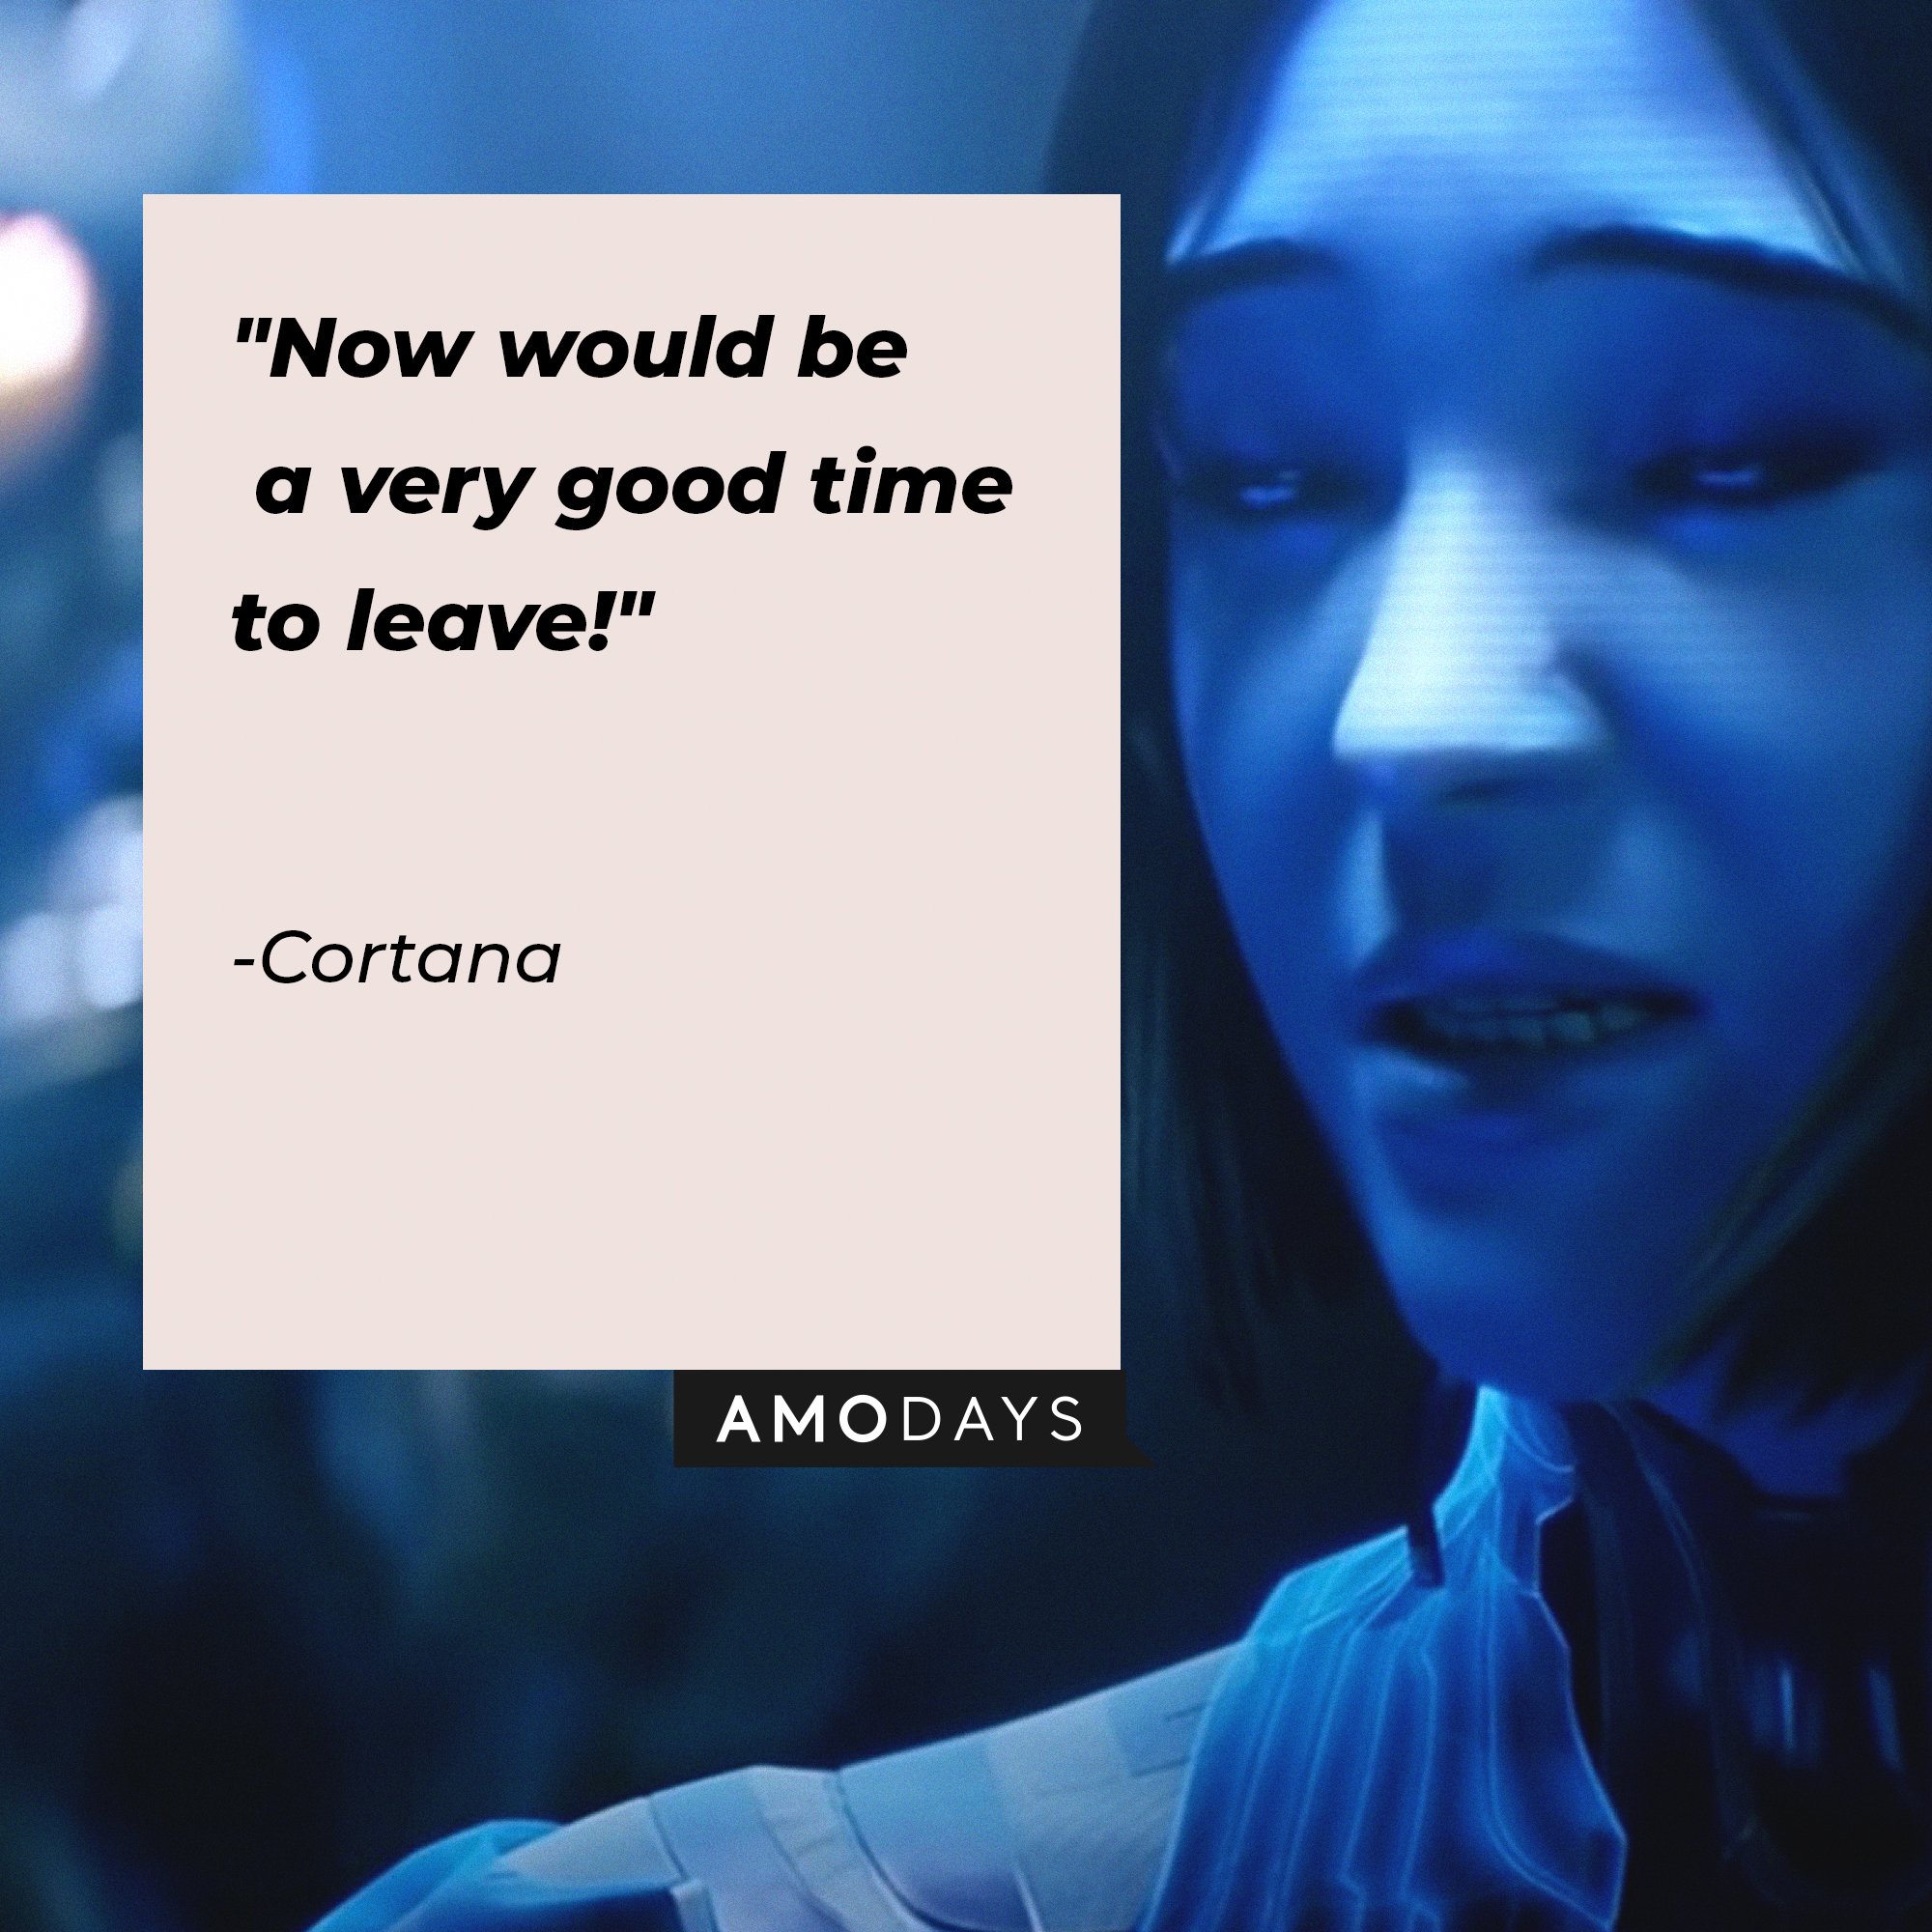 Cortana's quote: "Now would be a very good time to leave!" | Image: AmoDays